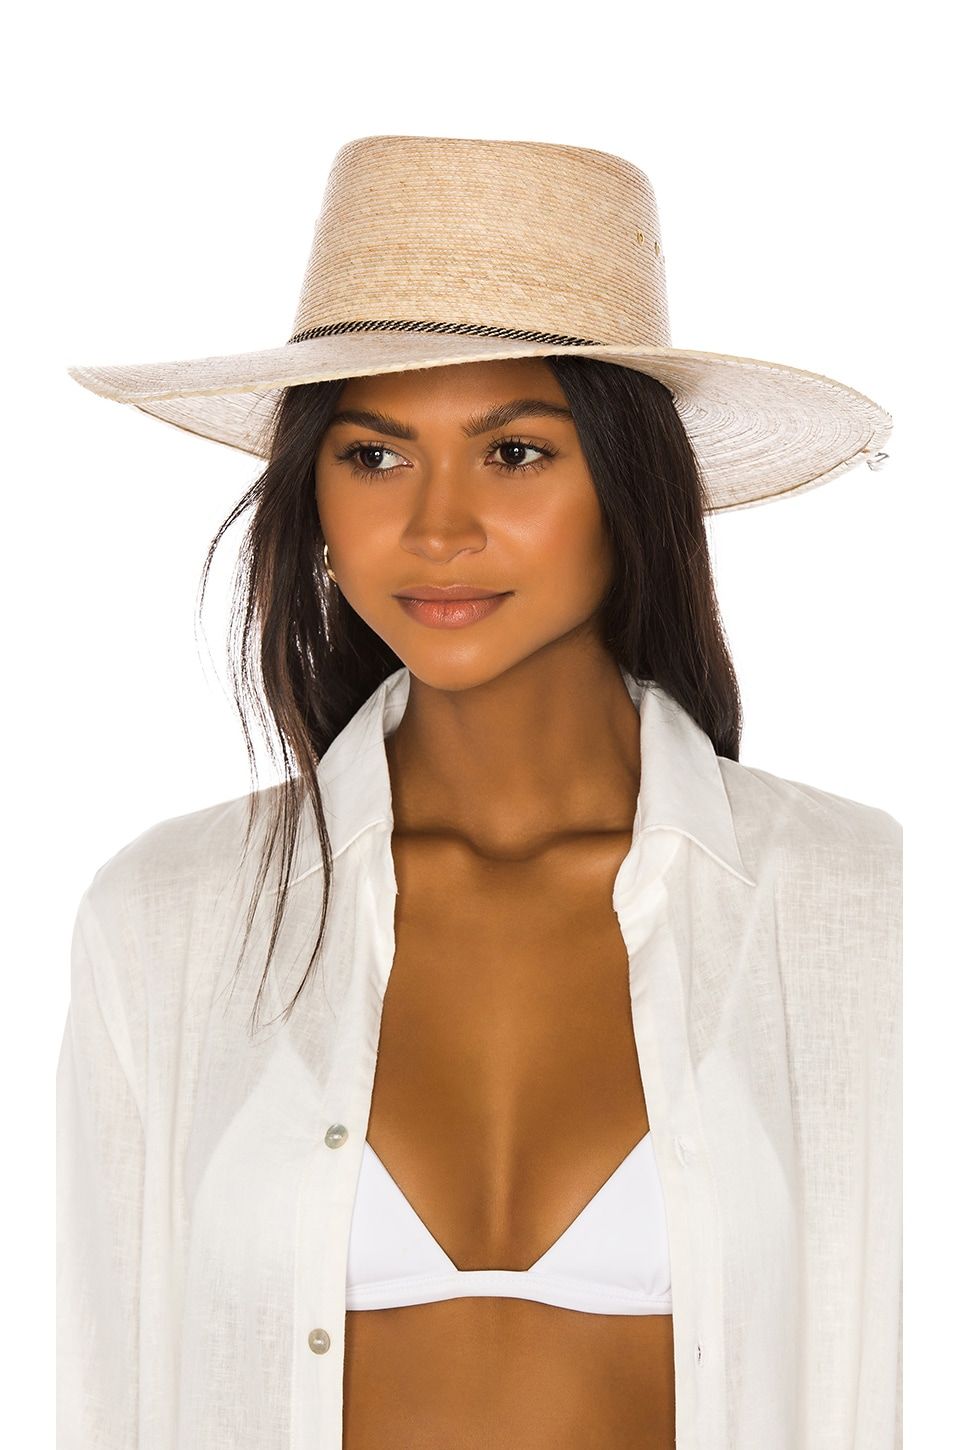 good hats for summer - OFF-51% > Shipping free